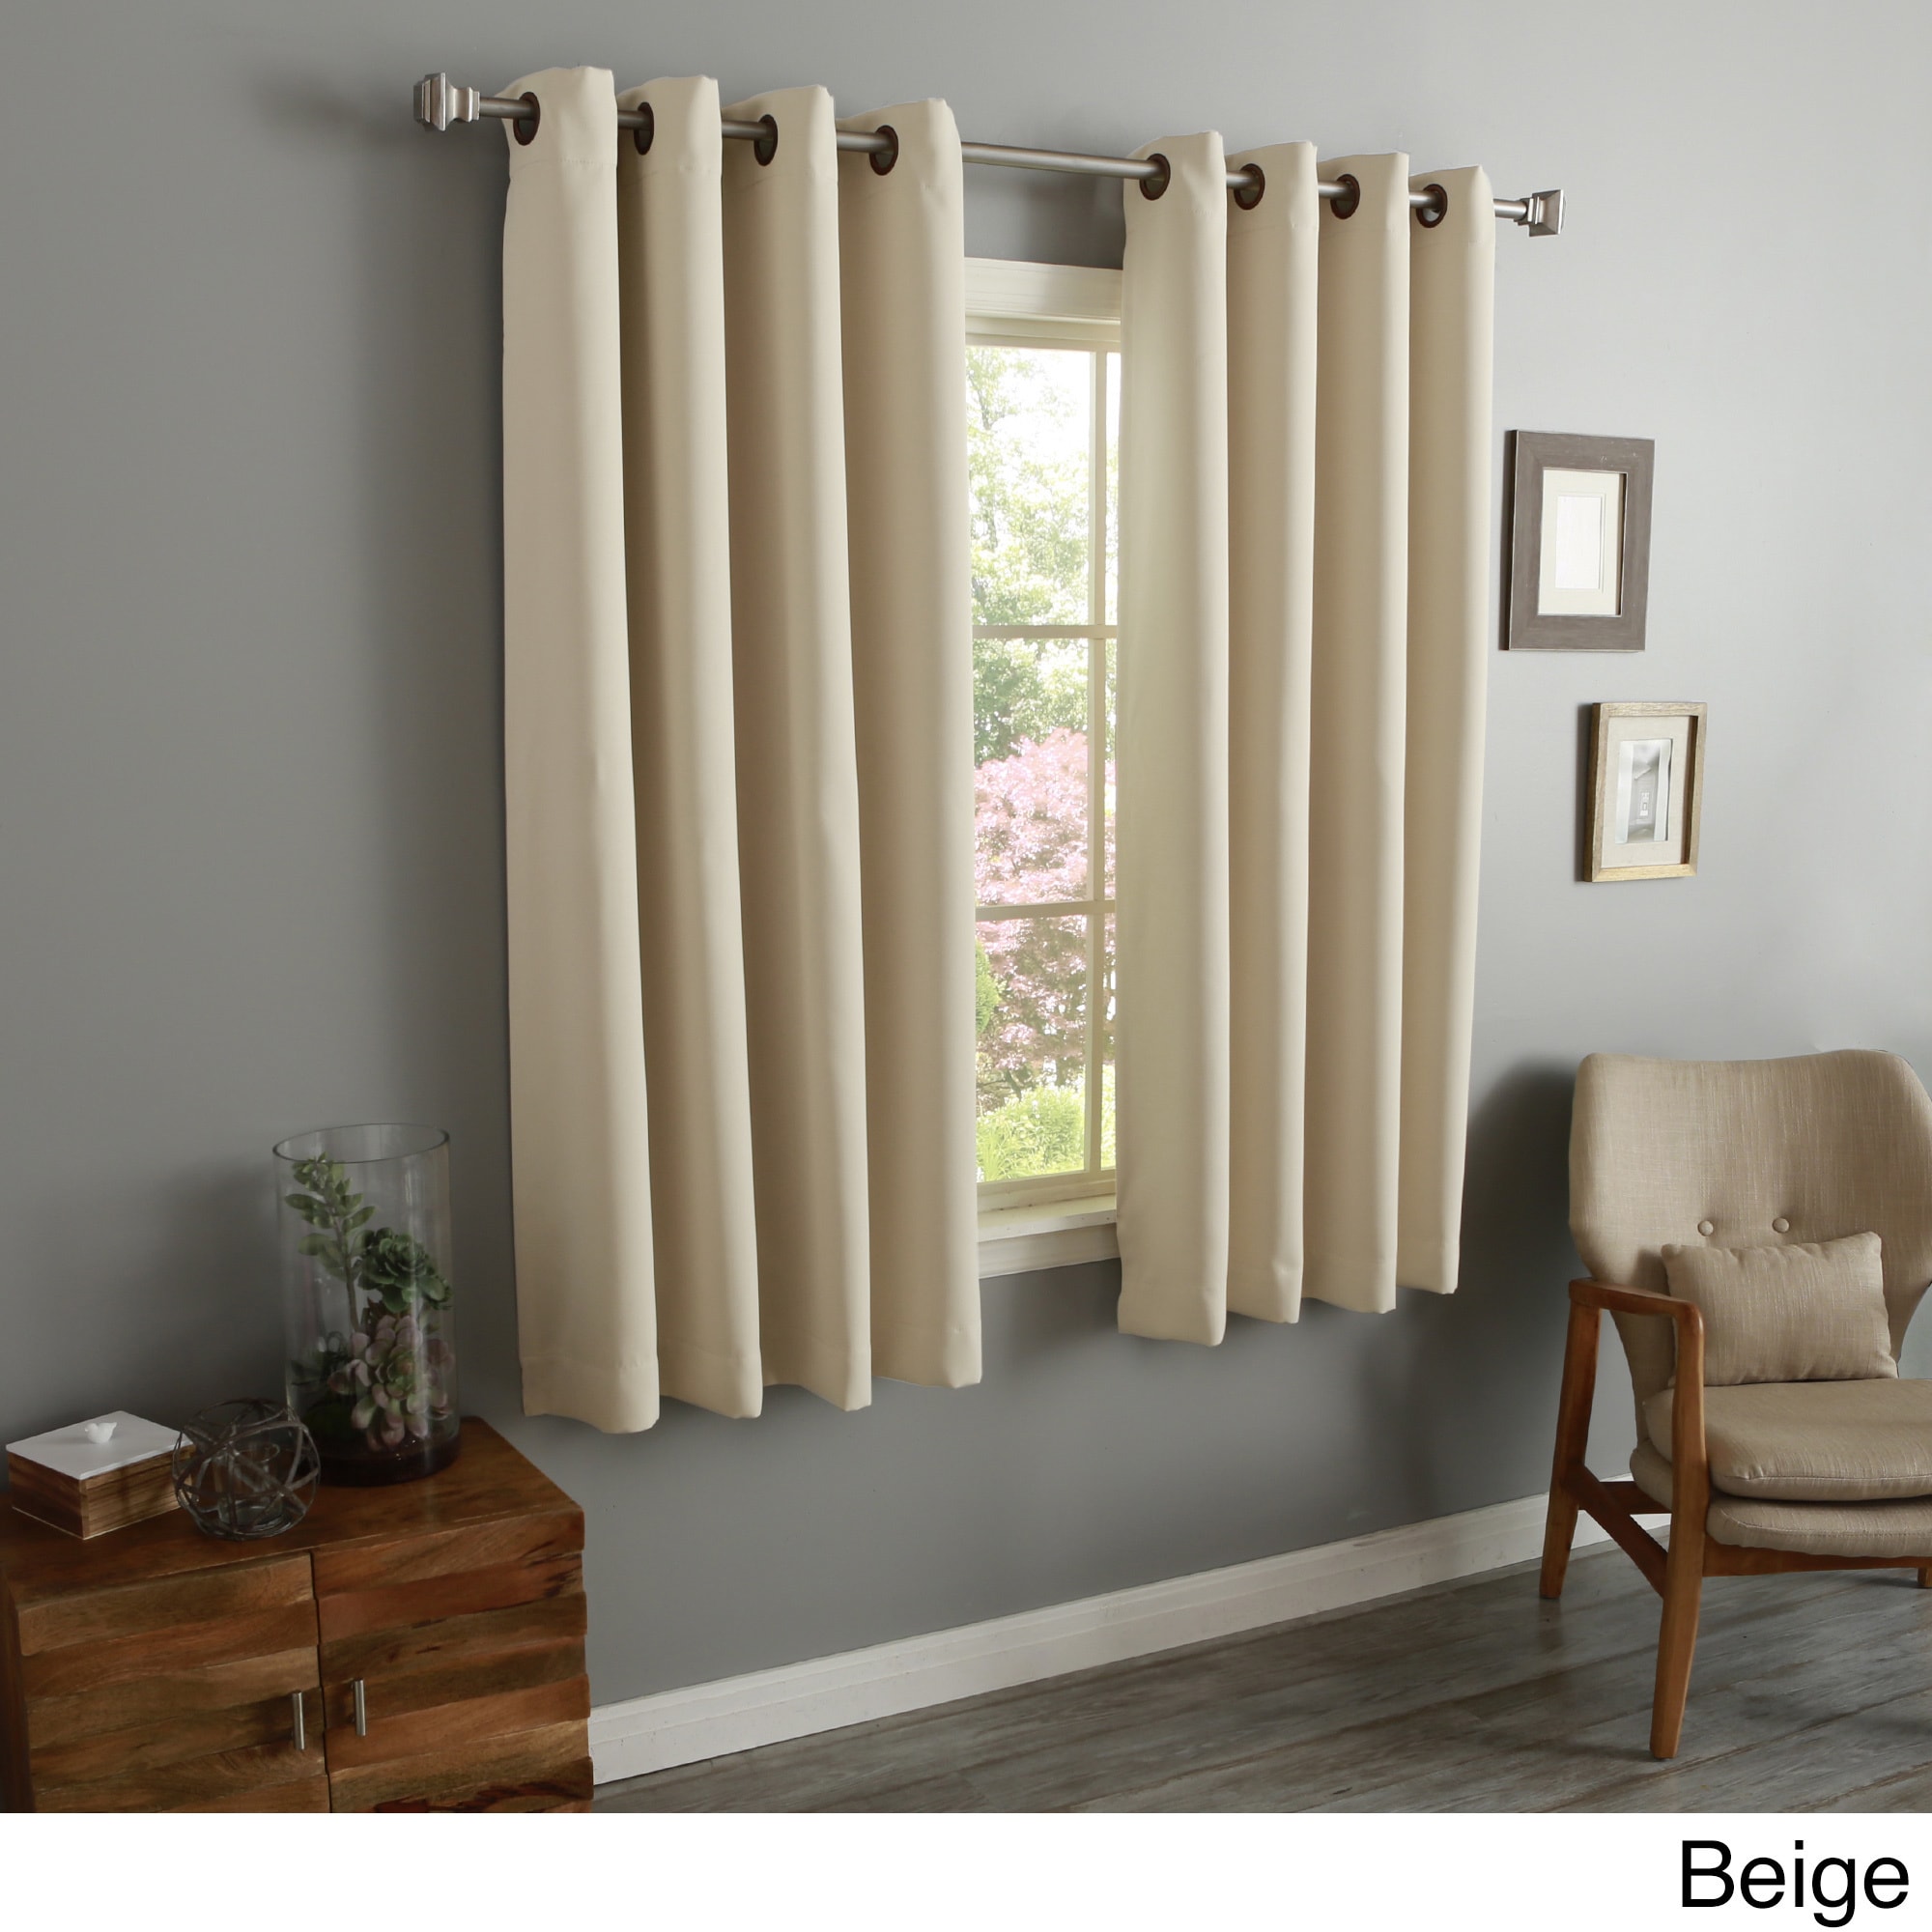 Thermal Insulated Blackout Grommet Curtain Drapes for Living Room-52 inch Width